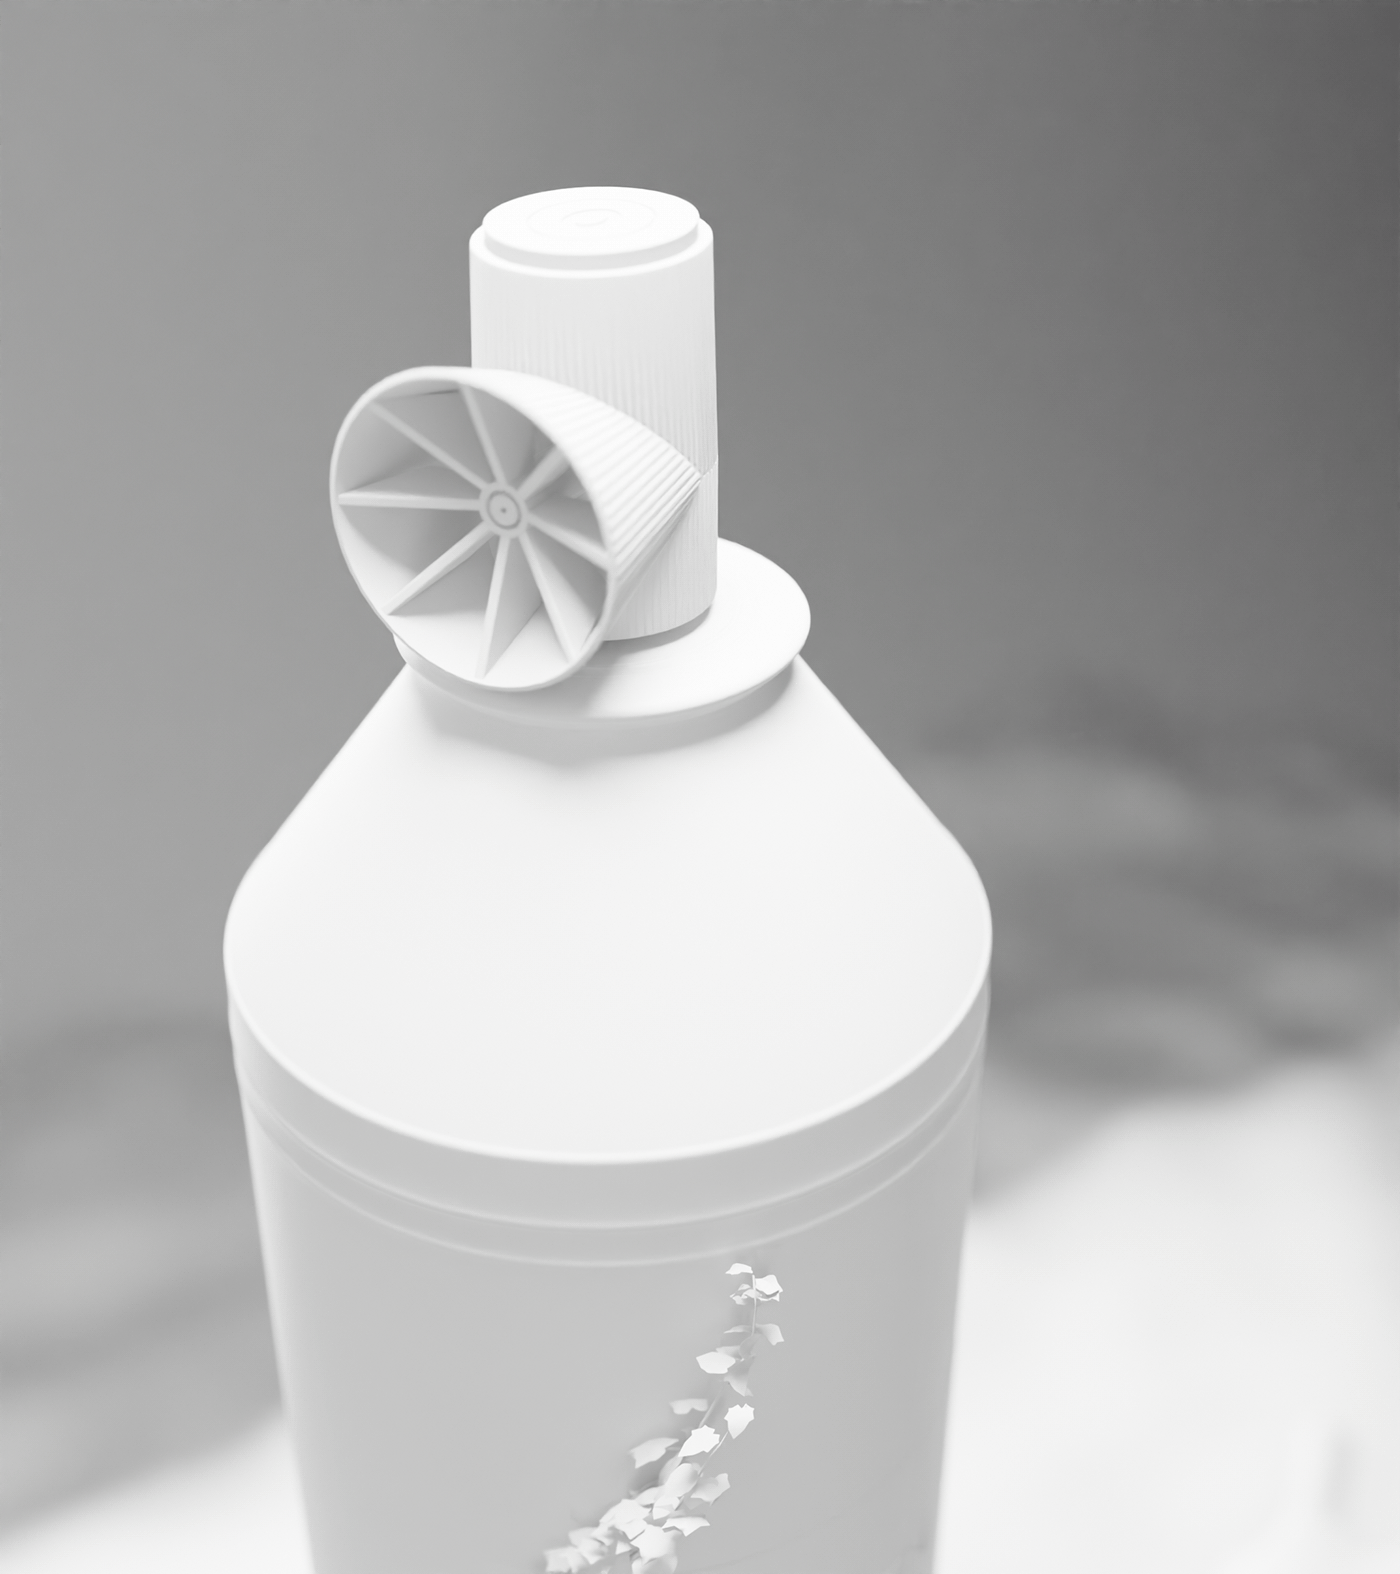 3D Animation Bottle Design, Product Visualization in 3D, 